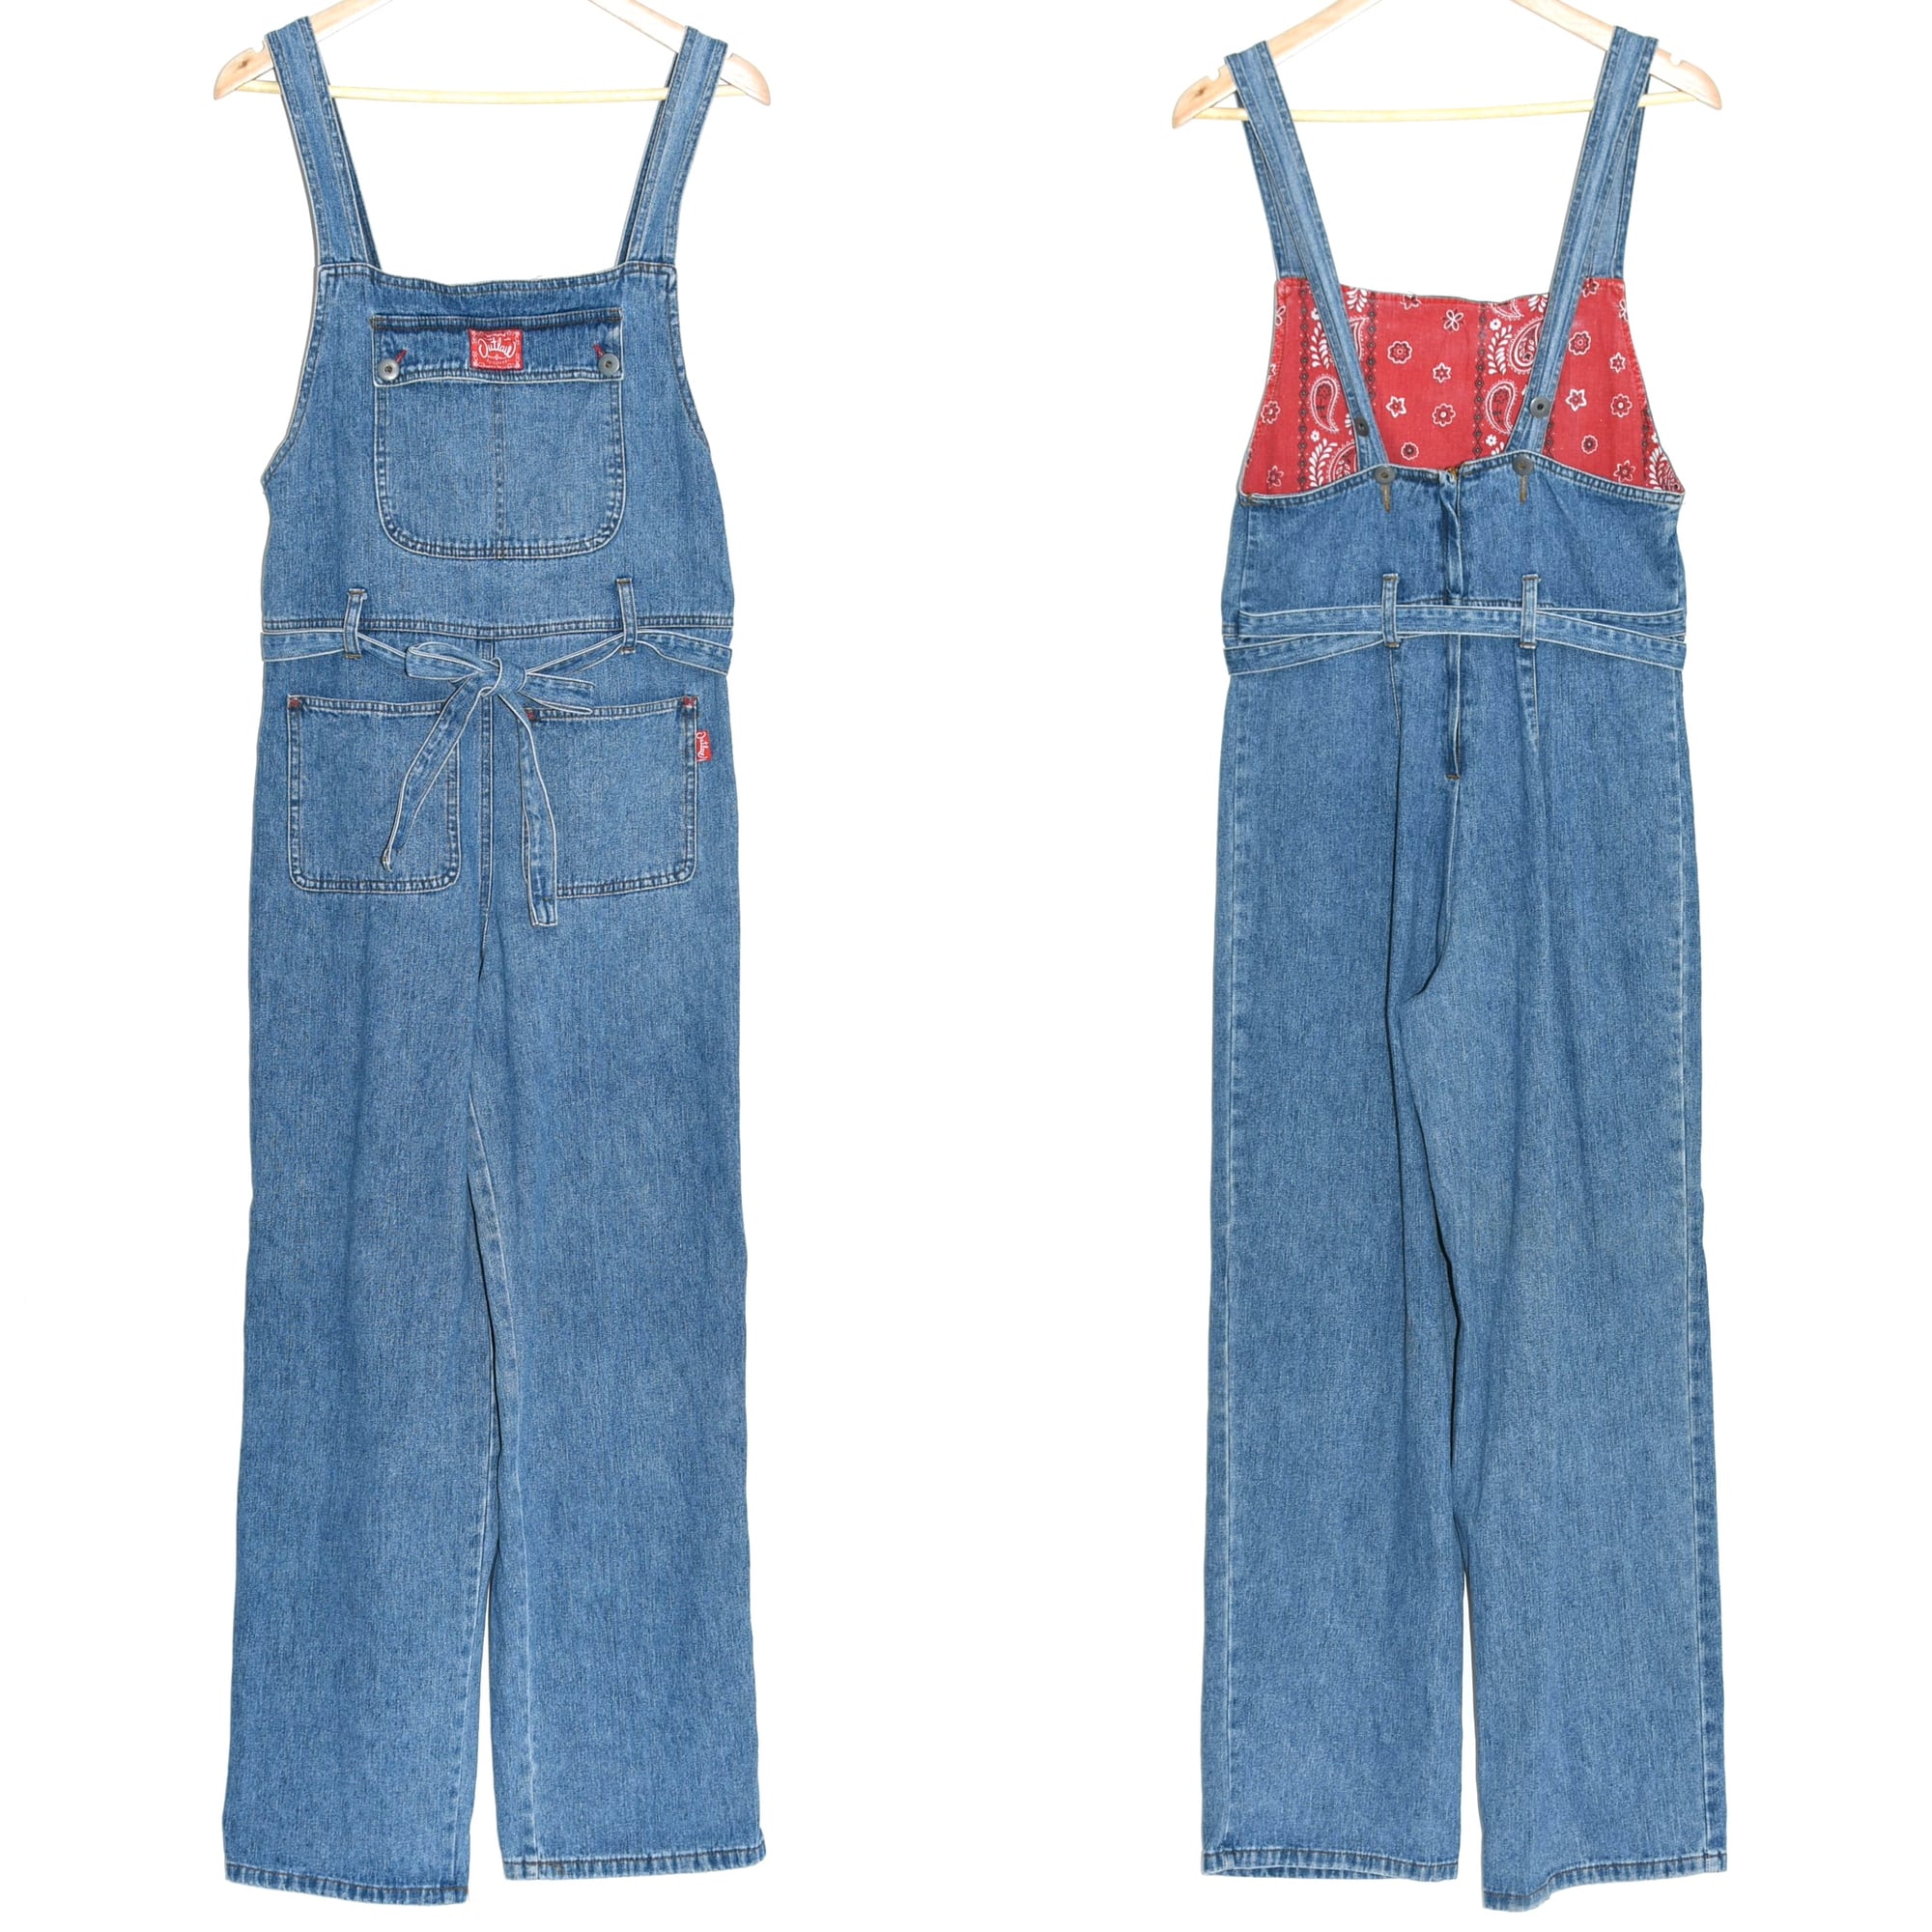 90's Outlaw BLUE JEANS denim overalls | 古着屋 grin days memory